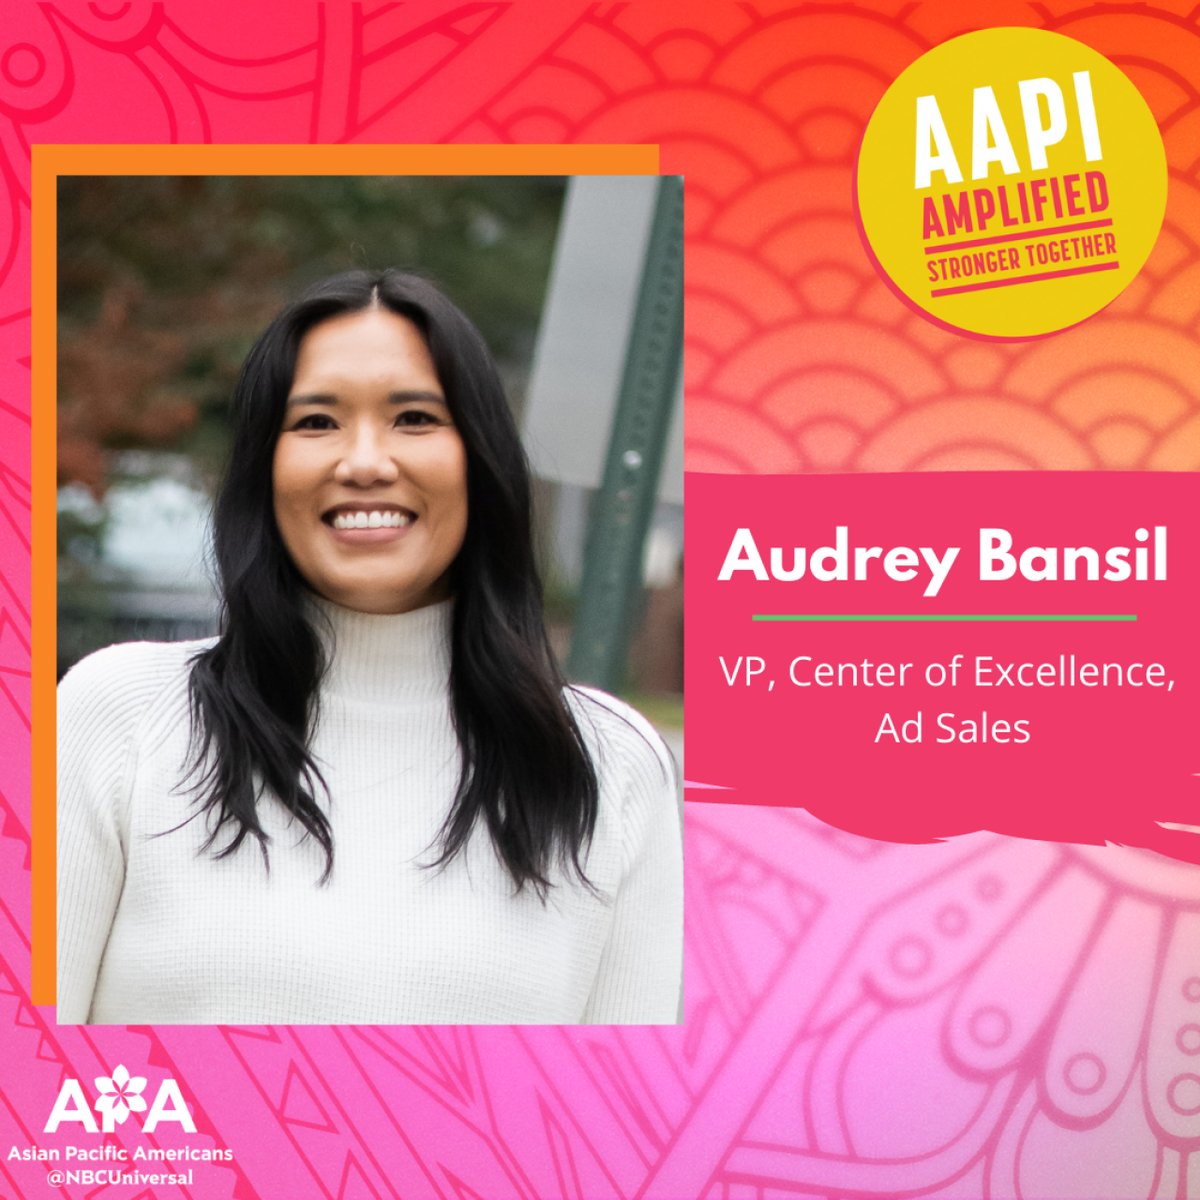 'Audrey has the compassion, motivation, and pioneer spirit of what inspires me as a person who is AAPI. She embodies her culture and is able to speak eloquently about diversity.” - Jessica Yu, Manager, Product, Operational Insights